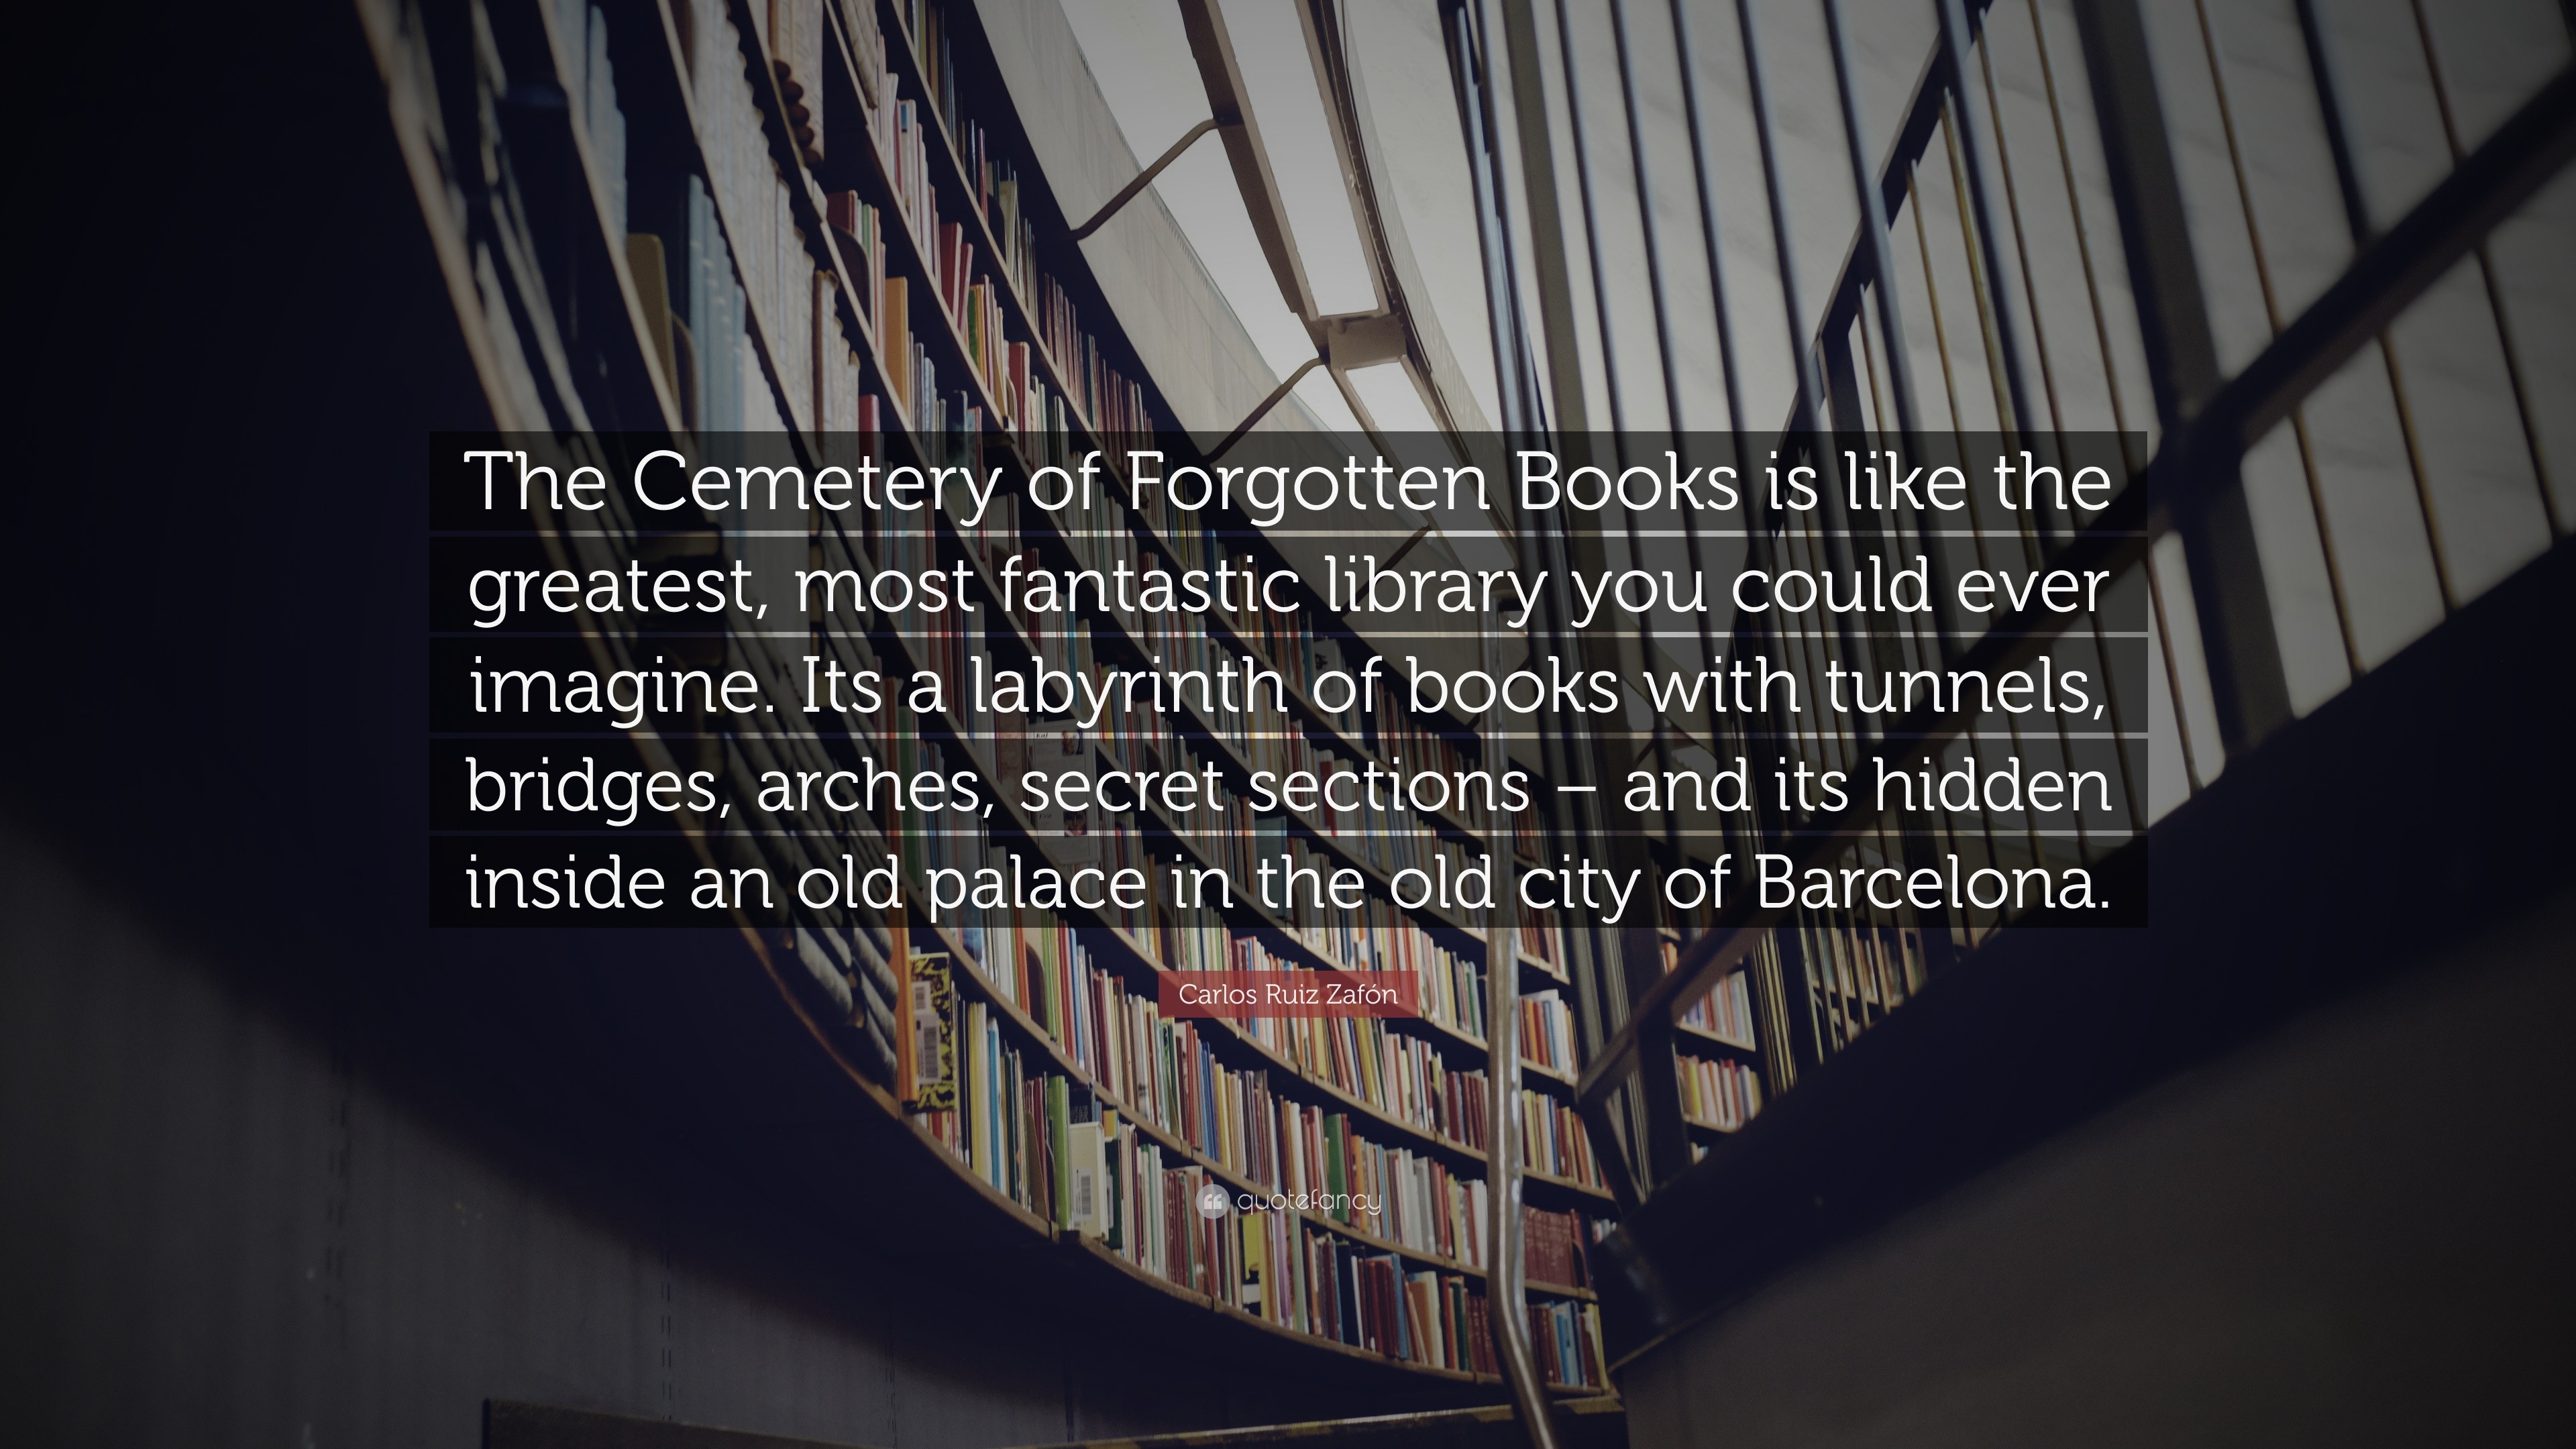 10 Captivating Carlos Ruiz Zafón Quotes About Books - Writers Write